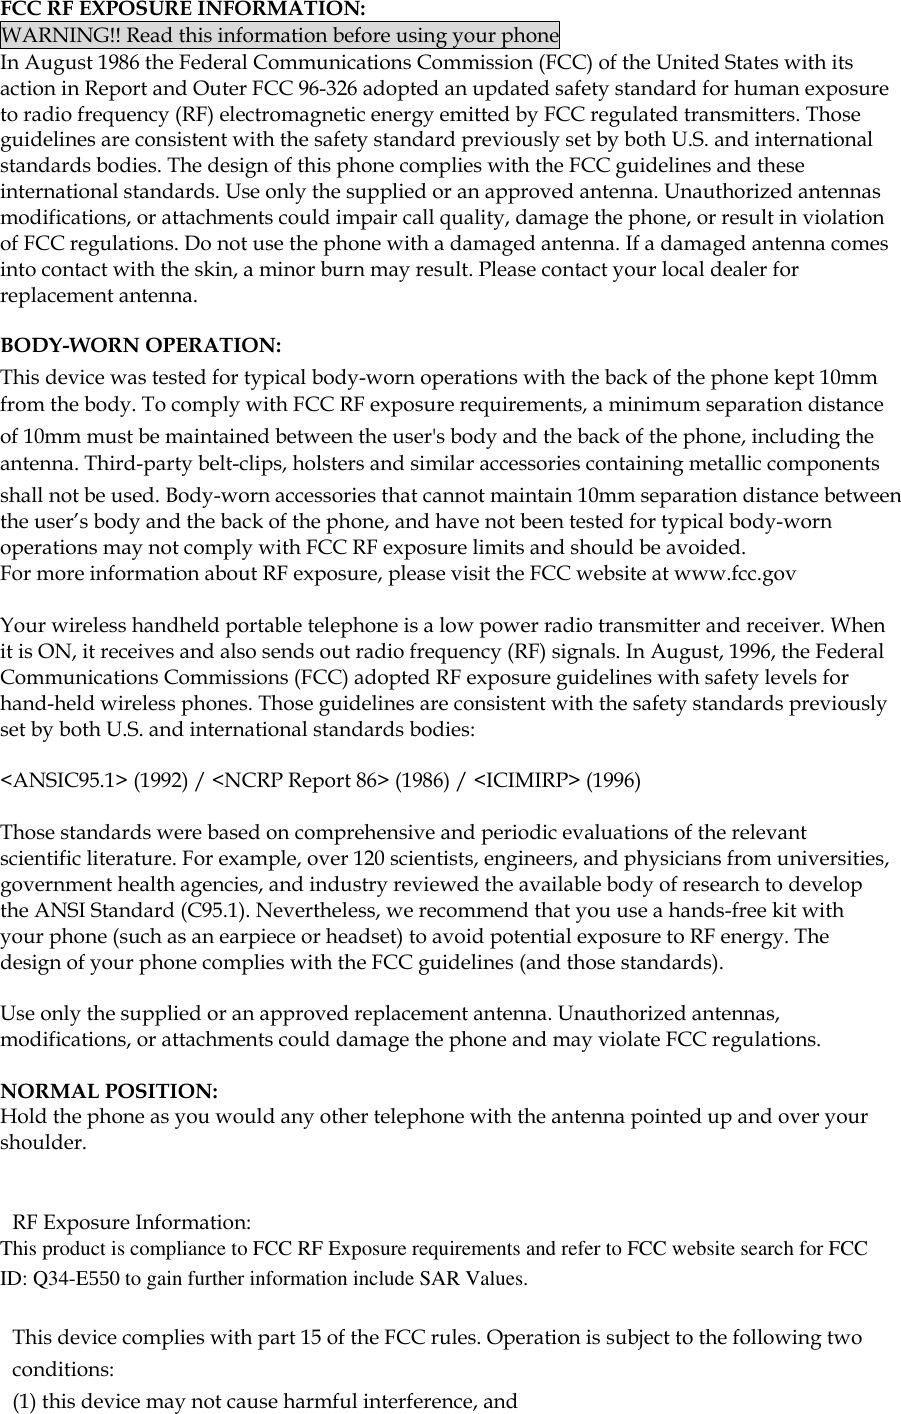  FCC RF EXPOSURE INFORMATION: WARNING!! Read this information before using your phone In August 1986 the Federal Communications Commission (FCC) of the United States with its action in Report and Outer FCC 96-326 adopted an updated safety standard for human exposure to radio frequency (RF) electromagnetic energy emitted by FCC regulated transmitters. Those guidelines are consistent with the safety standard previously set by both U.S. and international standards bodies. The design of this phone complies with the FCC guidelines and these international standards. Use only the supplied or an approved antenna. Unauthorized antennas modifications, or attachments could impair call quality, damage the phone, or result in violation of FCC regulations. Do not use the phone with a damaged antenna. If a damaged antenna comes into contact with the skin, a minor burn may result. Please contact your local dealer for replacement antenna.  BODY-WORN OPERATION: This device was tested for typical body-worn operations with the back of the phone kept 10mm from the body. To comply with FCC RF exposure requirements, a minimum separation distance of 10mm must be maintained between the user&apos;s body and the back of the phone, including the antenna. Third-party belt-clips, holsters and similar accessories containing metallic components shall not be used. Body-worn accessories that cannot maintain 10mm separation distance between the user’s body and the back of the phone, and have not been tested for typical body-worn operations may not comply with FCC RF exposure limits and should be avoided. For more information about RF exposure, please visit the FCC website at www.fcc.gov  Your wireless handheld portable telephone is a low power radio transmitter and receiver. When it is ON, it receives and also sends out radio frequency (RF) signals. In August, 1996, the Federal Communications Commissions (FCC) adopted RF exposure guidelines with safety levels for hand-held wireless phones. Those guidelines are consistent with the safety standards previously set by both U.S. and international standards bodies:  &lt;ANSIC95.1&gt; (1992) / &lt;NCRP Report 86&gt; (1986) / &lt;ICIMIRP&gt; (1996)  Those standards were based on comprehensive and periodic evaluations of the relevant scientific literature. For example, over 120 scientists, engineers, and physicians from universities, government health agencies, and industry reviewed the available body of research to develop the ANSI Standard (C95.1). Nevertheless, we recommend that you use a hands-free kit with your phone (such as an earpiece or headset) to avoid potential exposure to RF energy. The design of your phone complies with the FCC guidelines (and those standards).  Use only the supplied or an approved replacement antenna. Unauthorized antennas, modifications, or attachments could damage the phone and may violate FCC regulations.   NORMAL POSITION:  Hold the phone as you would any other telephone with the antenna pointed up and over your shoulder.   RF Exposure Information: This product is compliance to FCC RF Exposure requirements and refer to FCC website search for FCC ID: Q34-E550 to gain further information include SAR Values.    This device complies with part 15 of the FCC rules. Operation is subject to the following two conditions: (1) this device may not cause harmful interference, and 